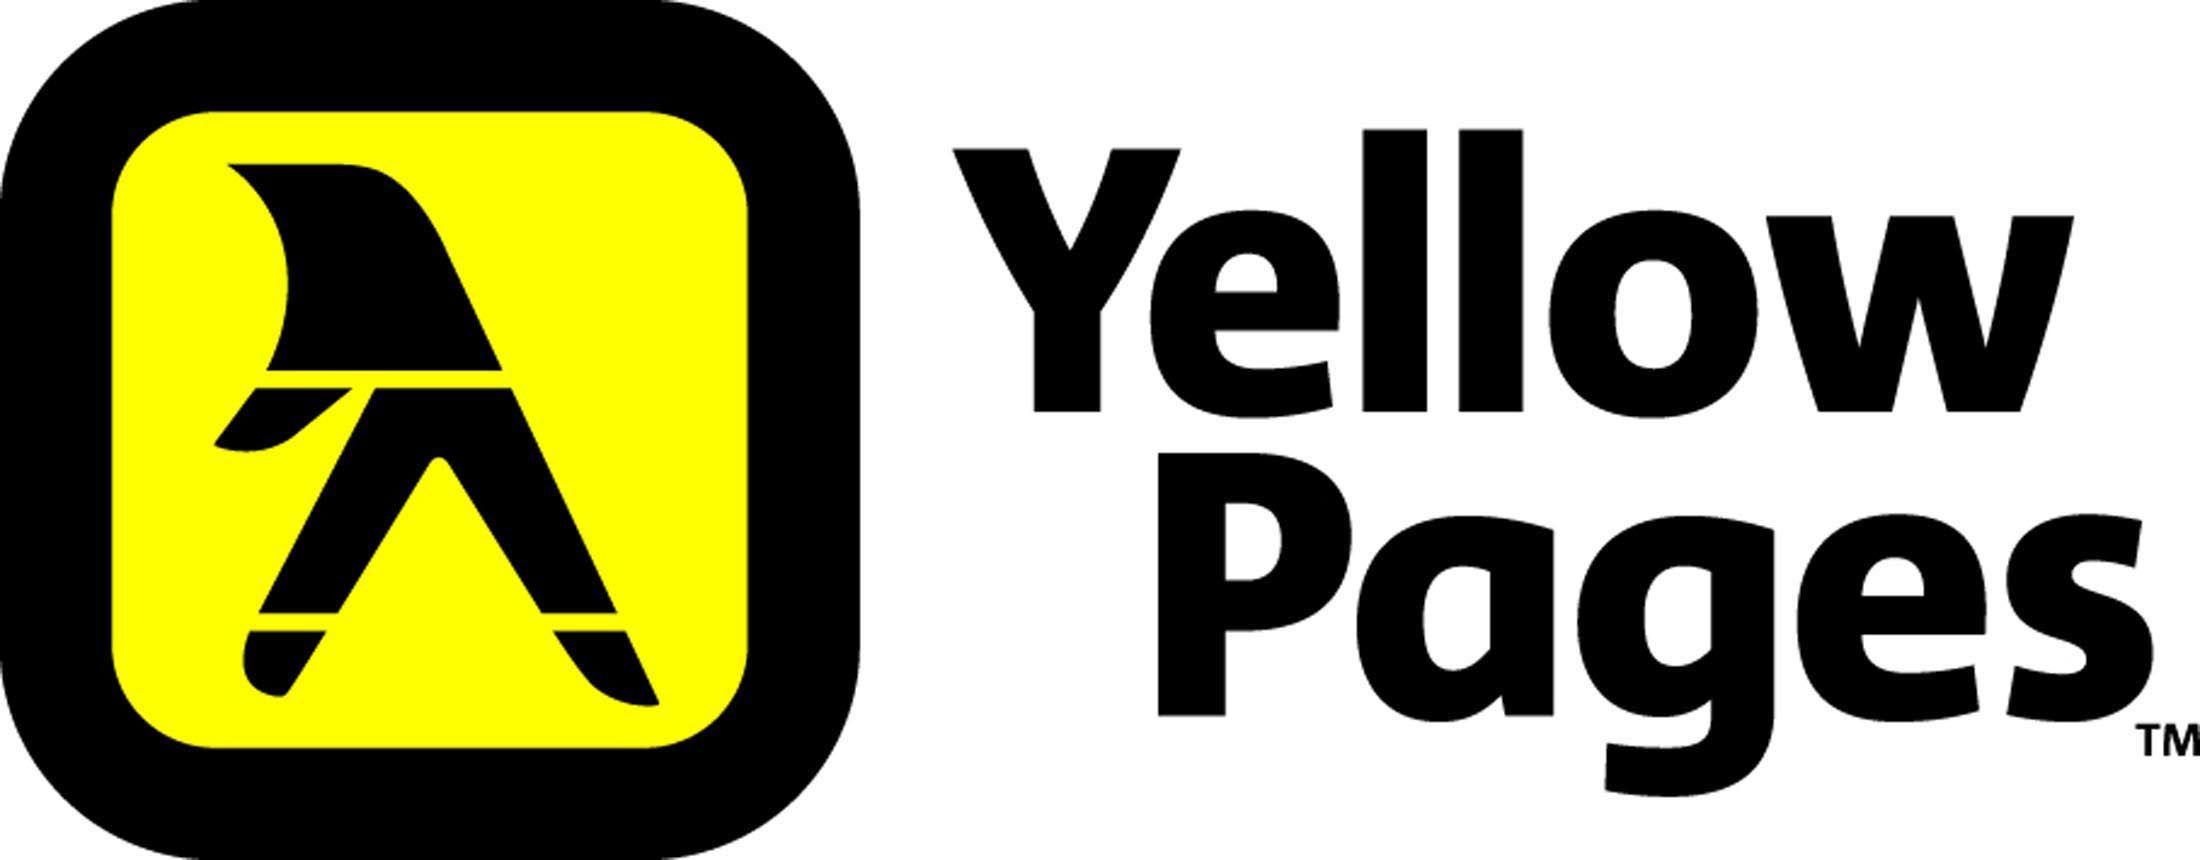 Yellow Pages Review Logo - 1. Visit yellowpages.com or yp.com 2. Search “PT Plus” and enter the ...